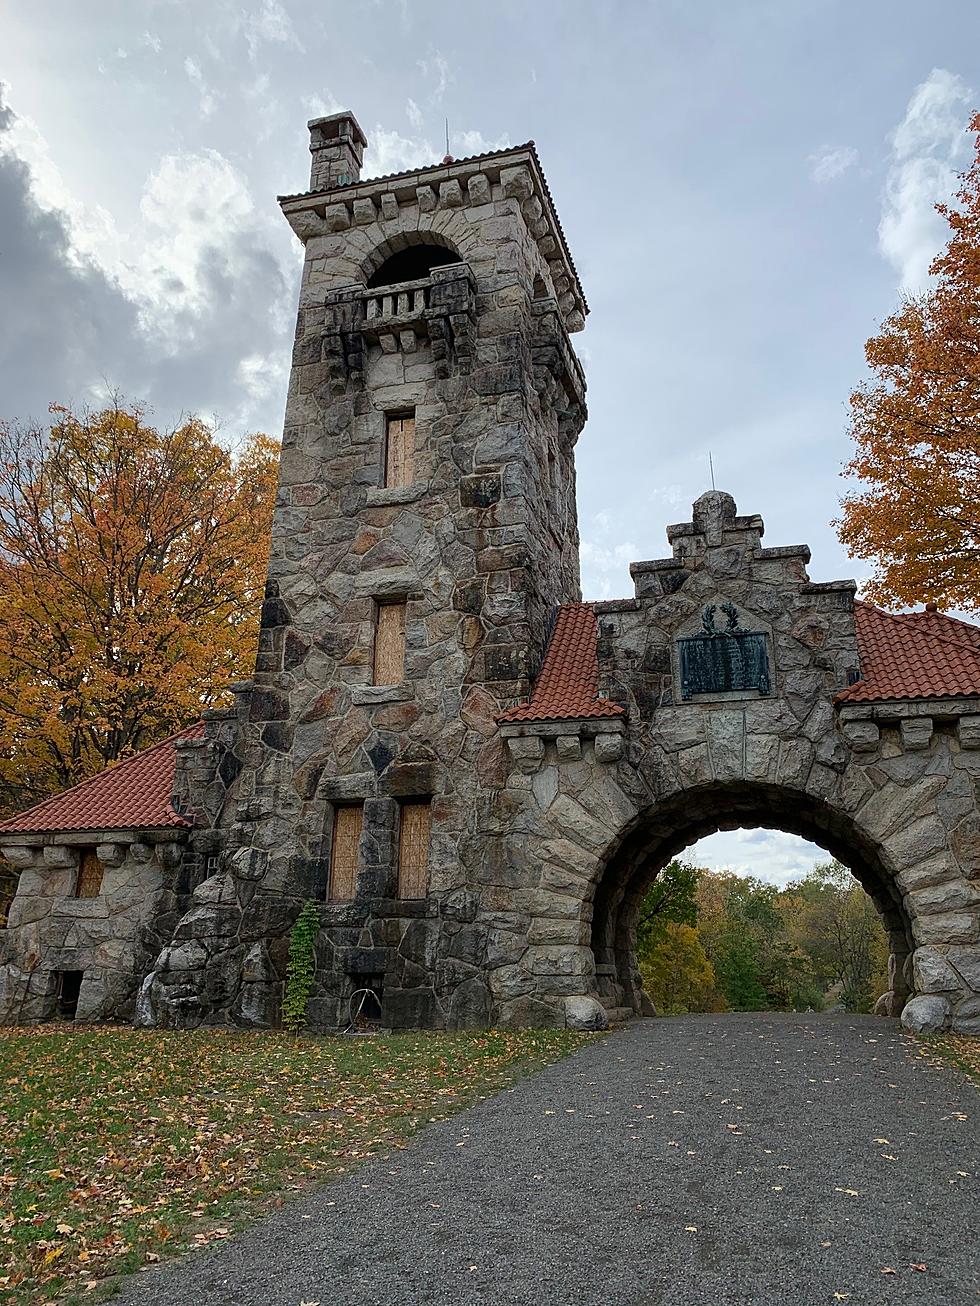 A Abandoned Castle You Can Hike to That’s Near the Hudson Valley?